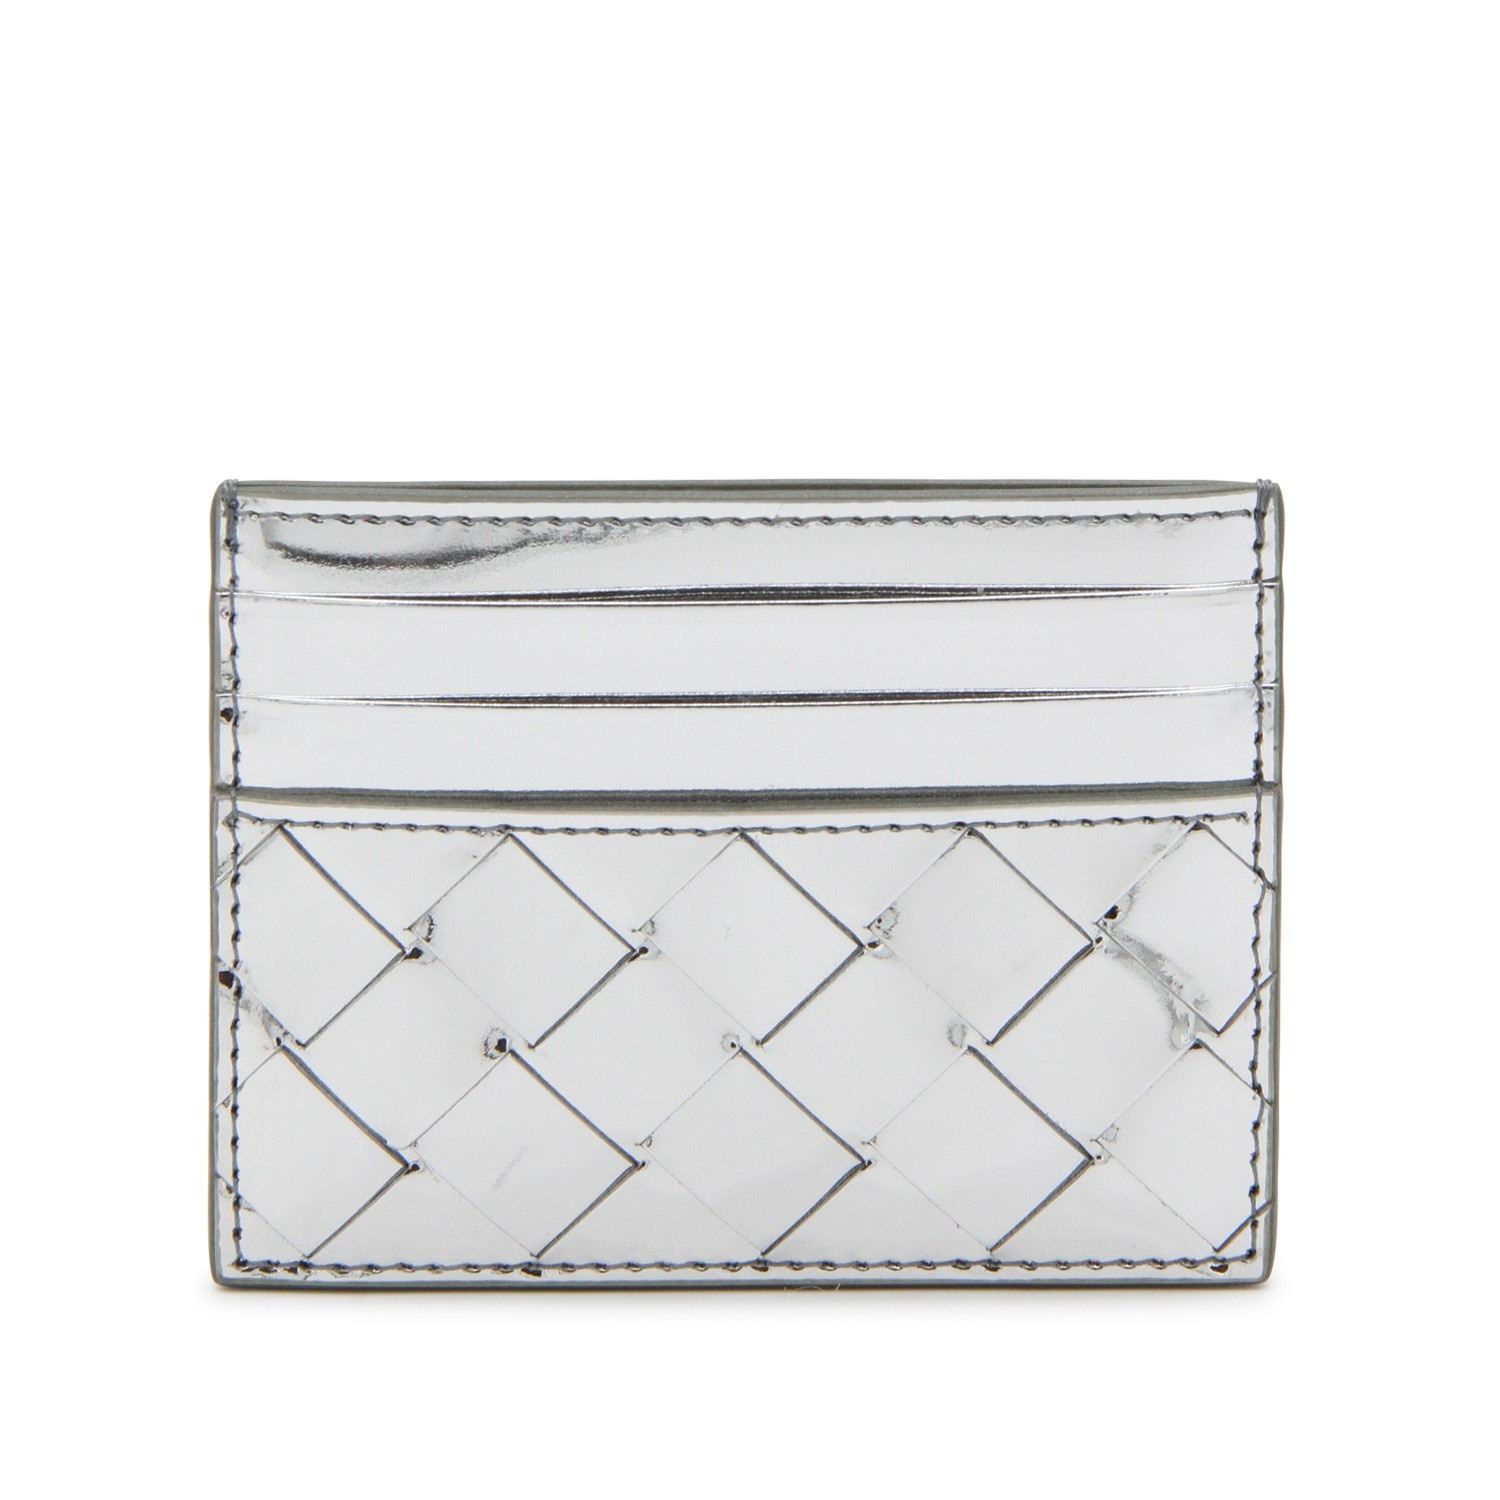 SILVER-TONE LEATHER CARD HOLDER - 2